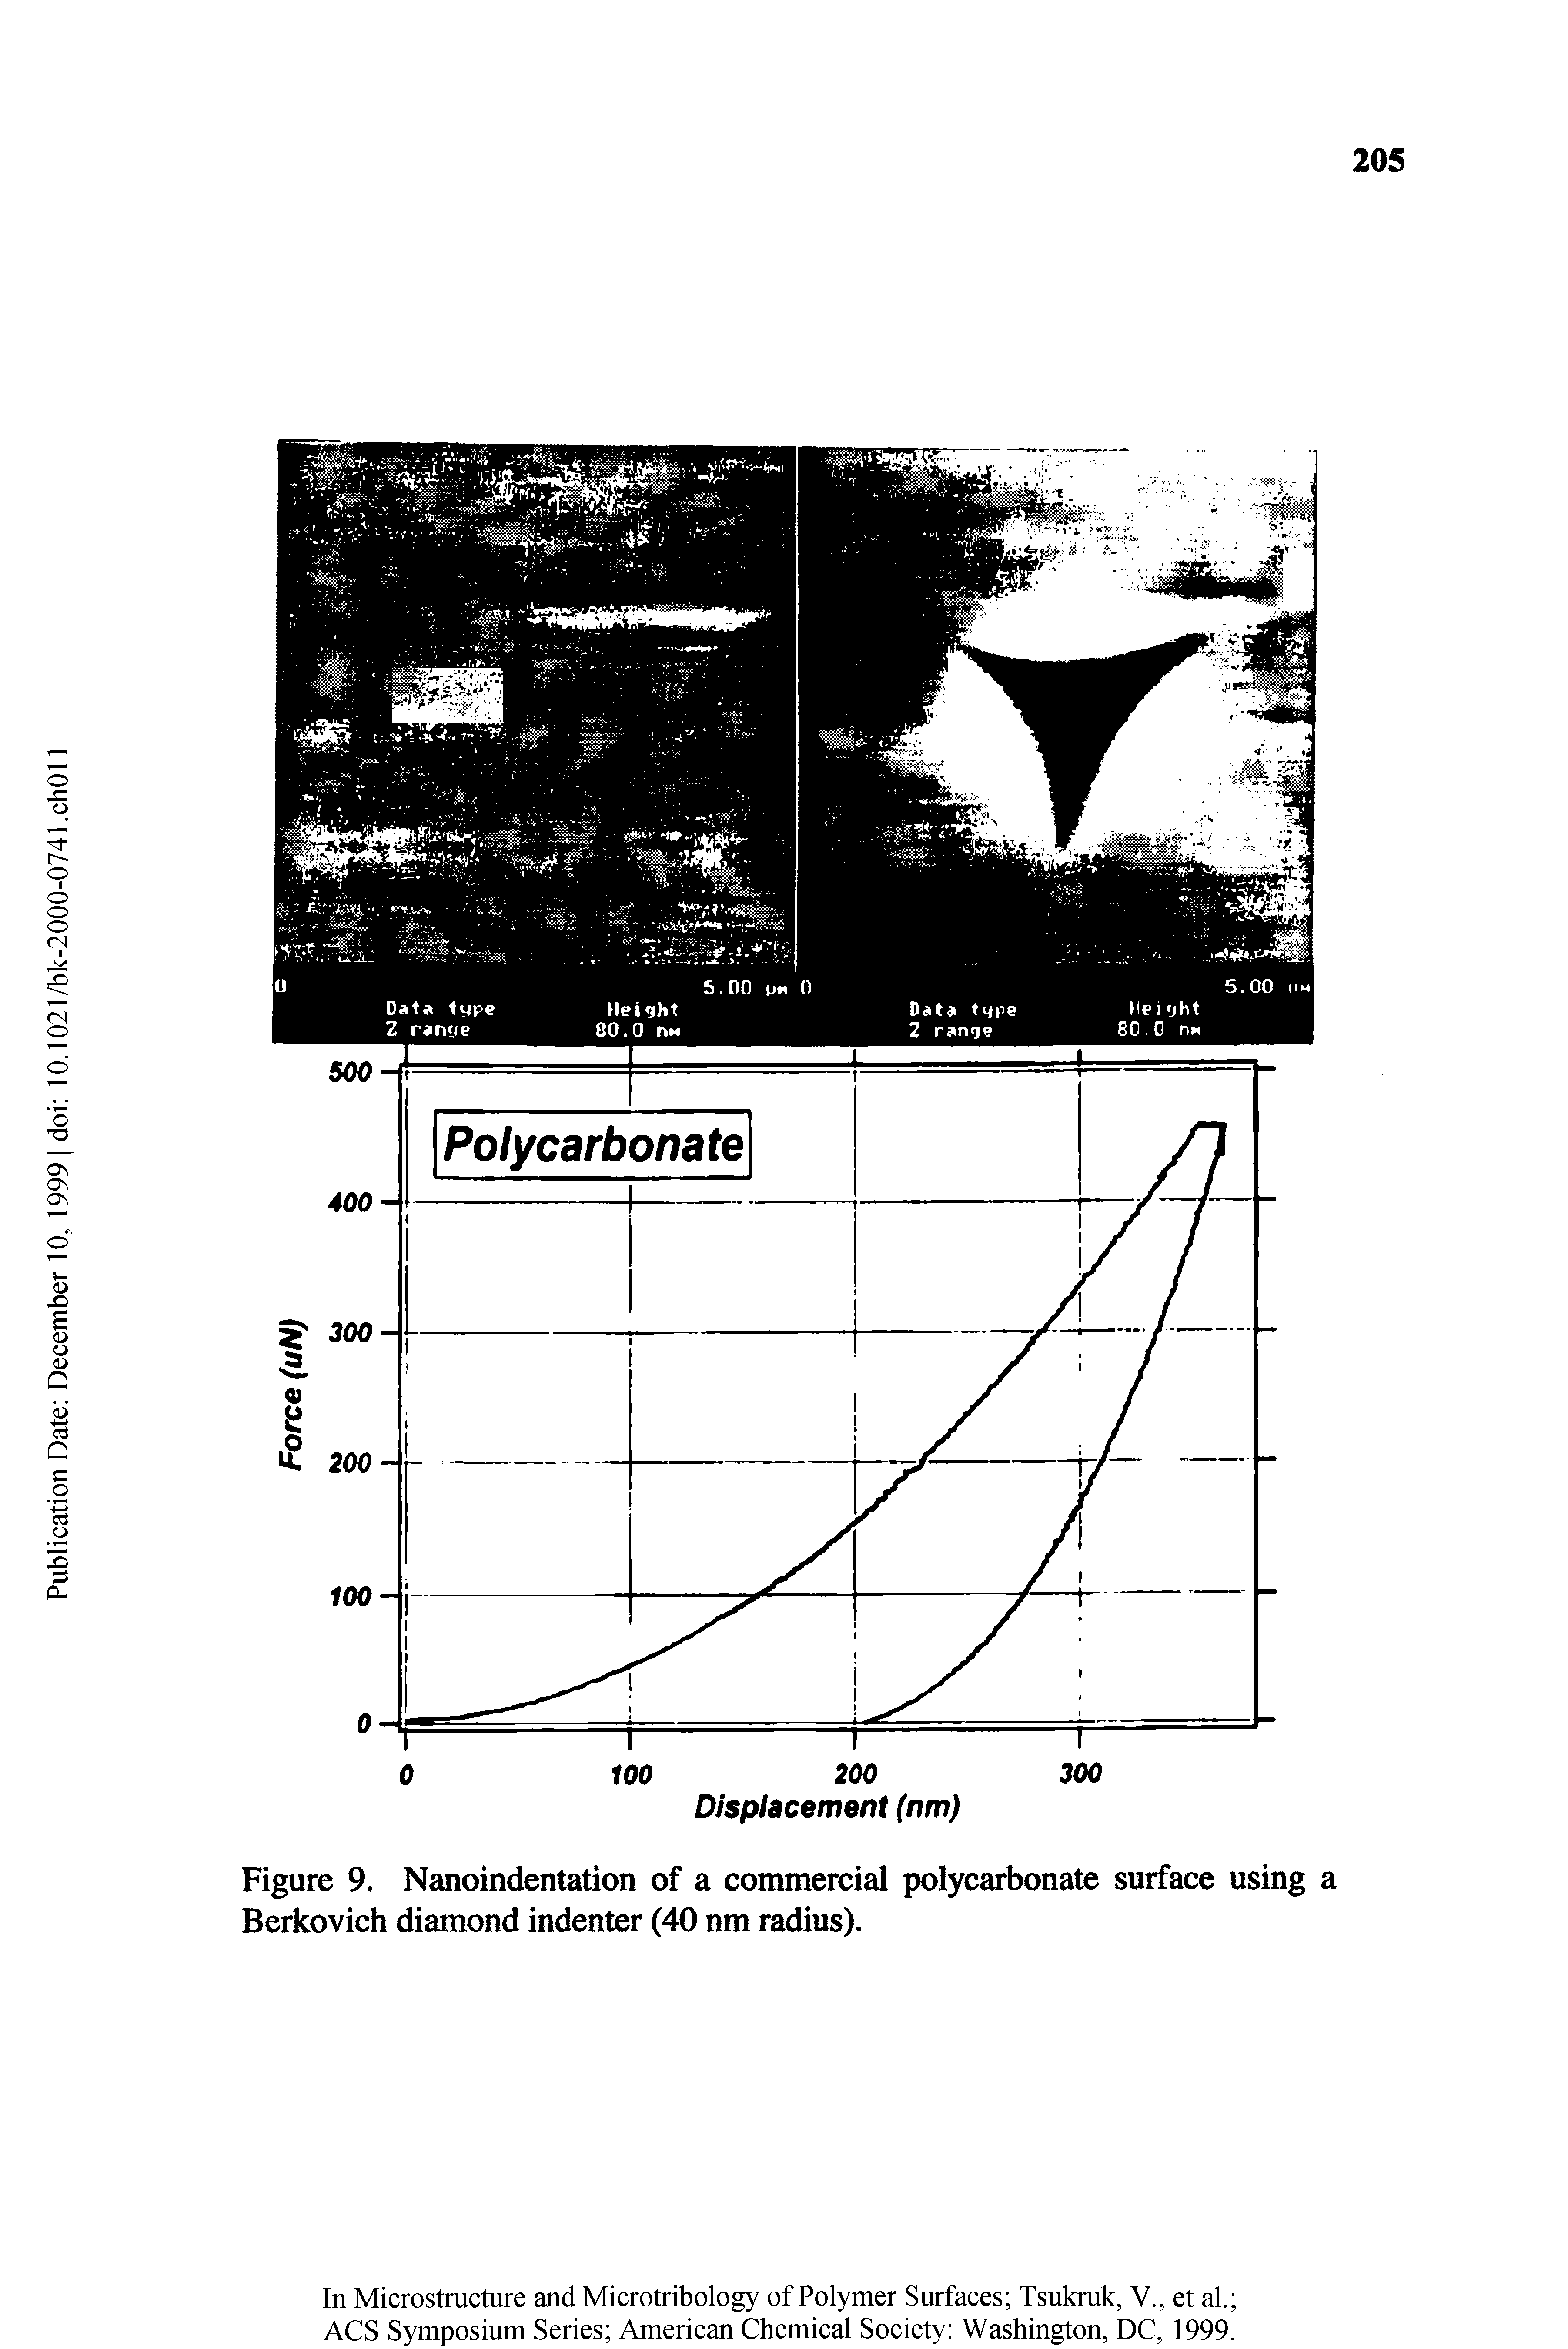 Figure 9. Nanoindentation of a commercial polycarbonate surface using a Berkovich diamond indenter (40 nm radius).